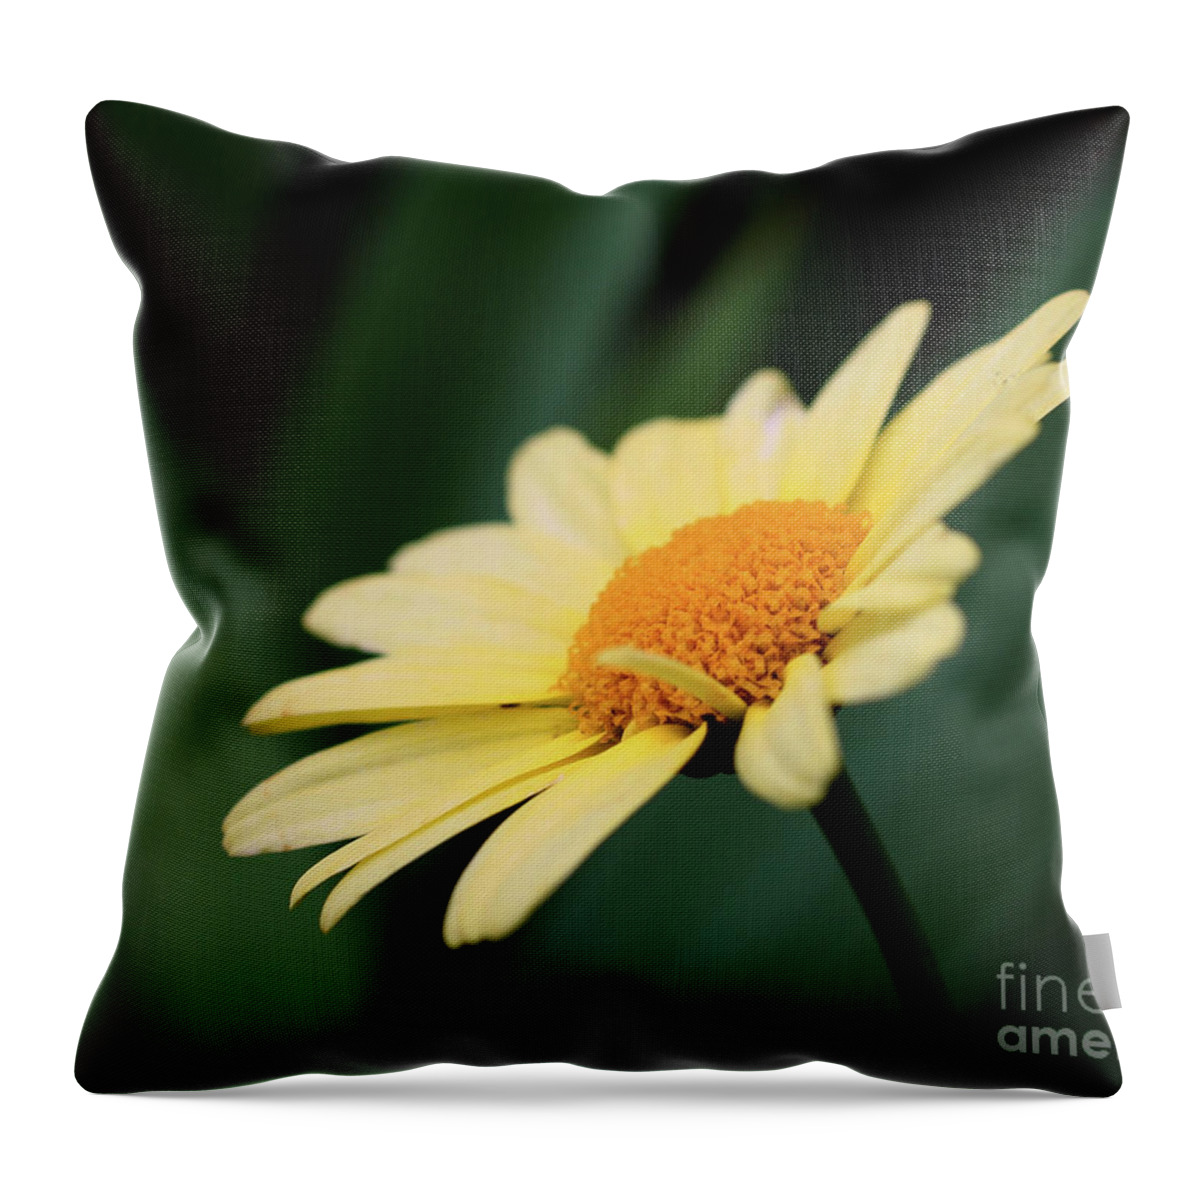 Daisies Throw Pillow featuring the photograph Yellow Daisy by Smilin Eyes Treasures